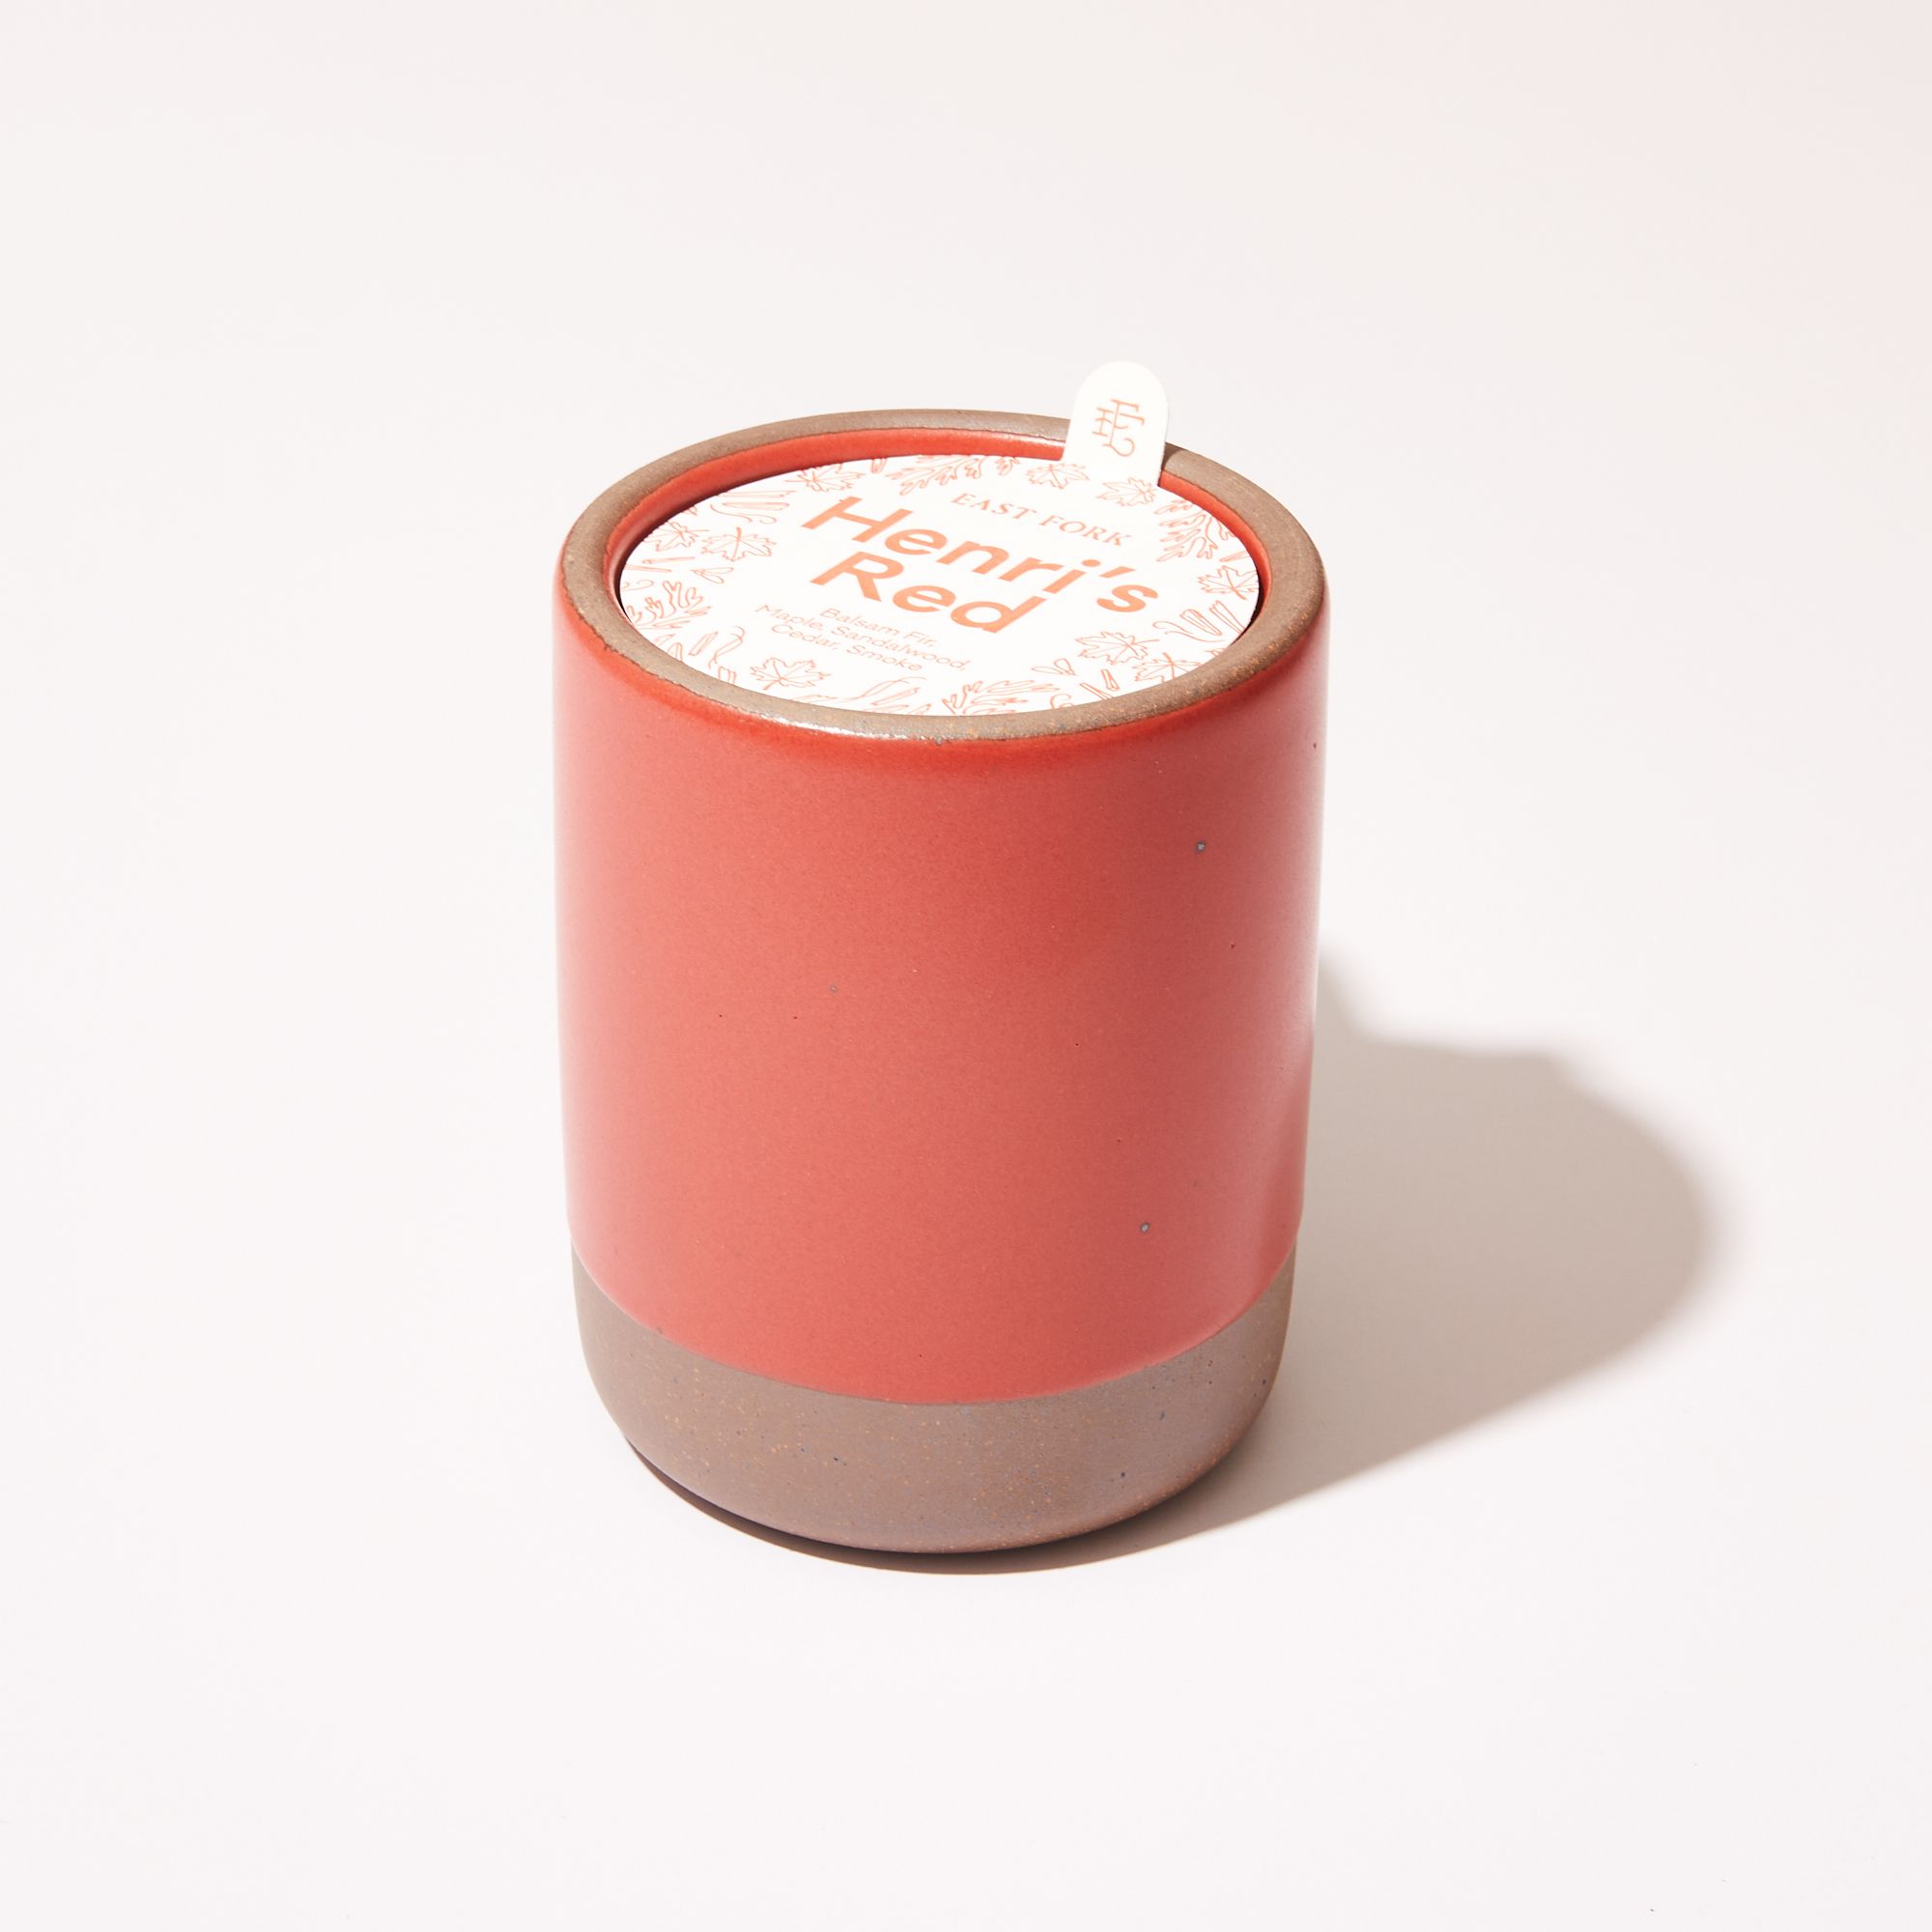 Large ceramic vessel in orange-red color with candle inside. On top is a packaging label sitting on top that reads "Henri's Red"